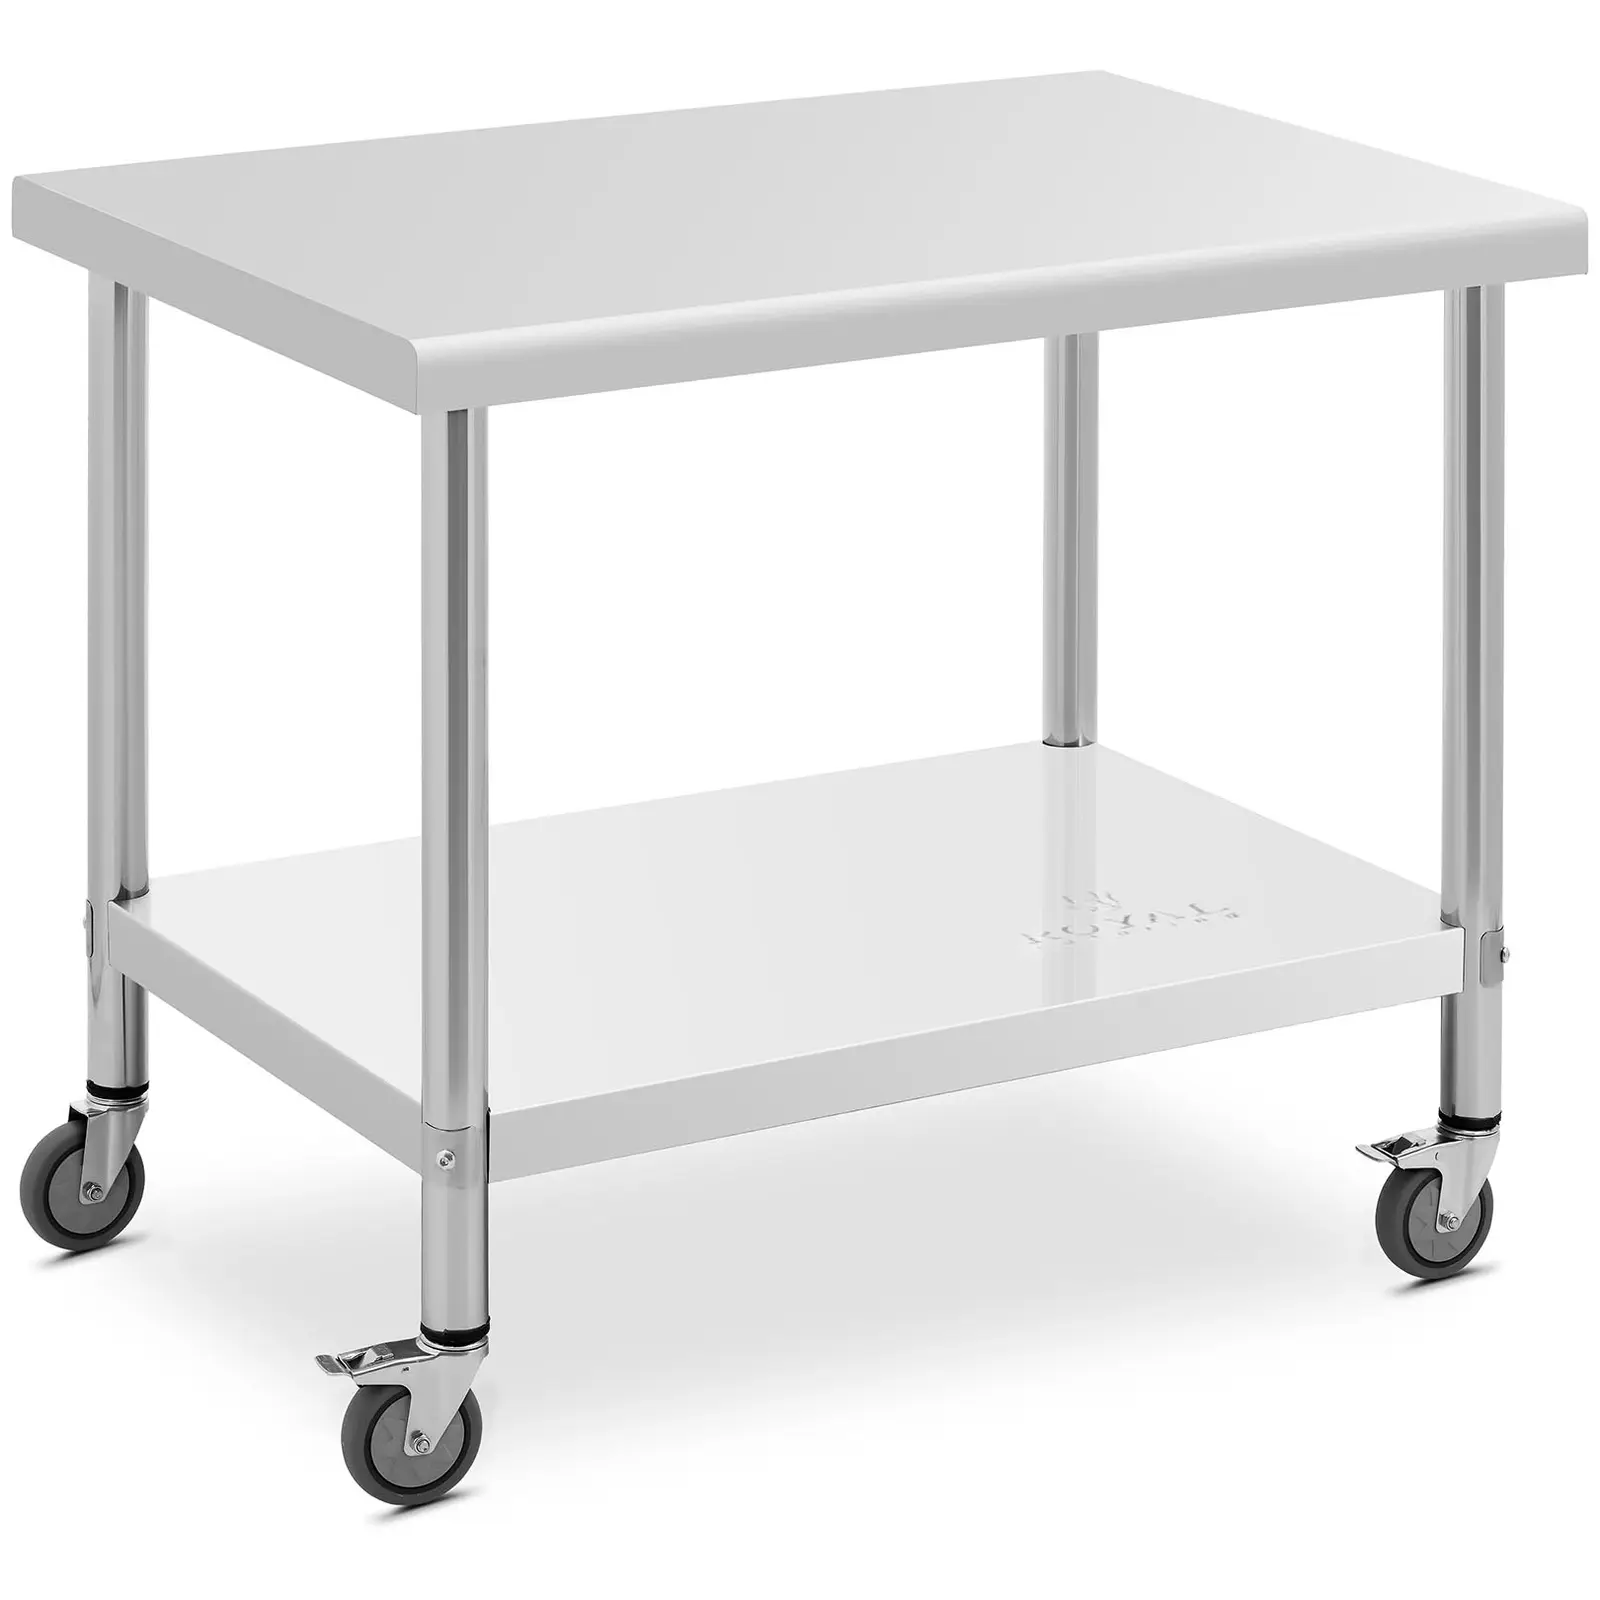 Wheeled work bench - 70 x 100 cm - 155 kg load capacity - Royal Catering